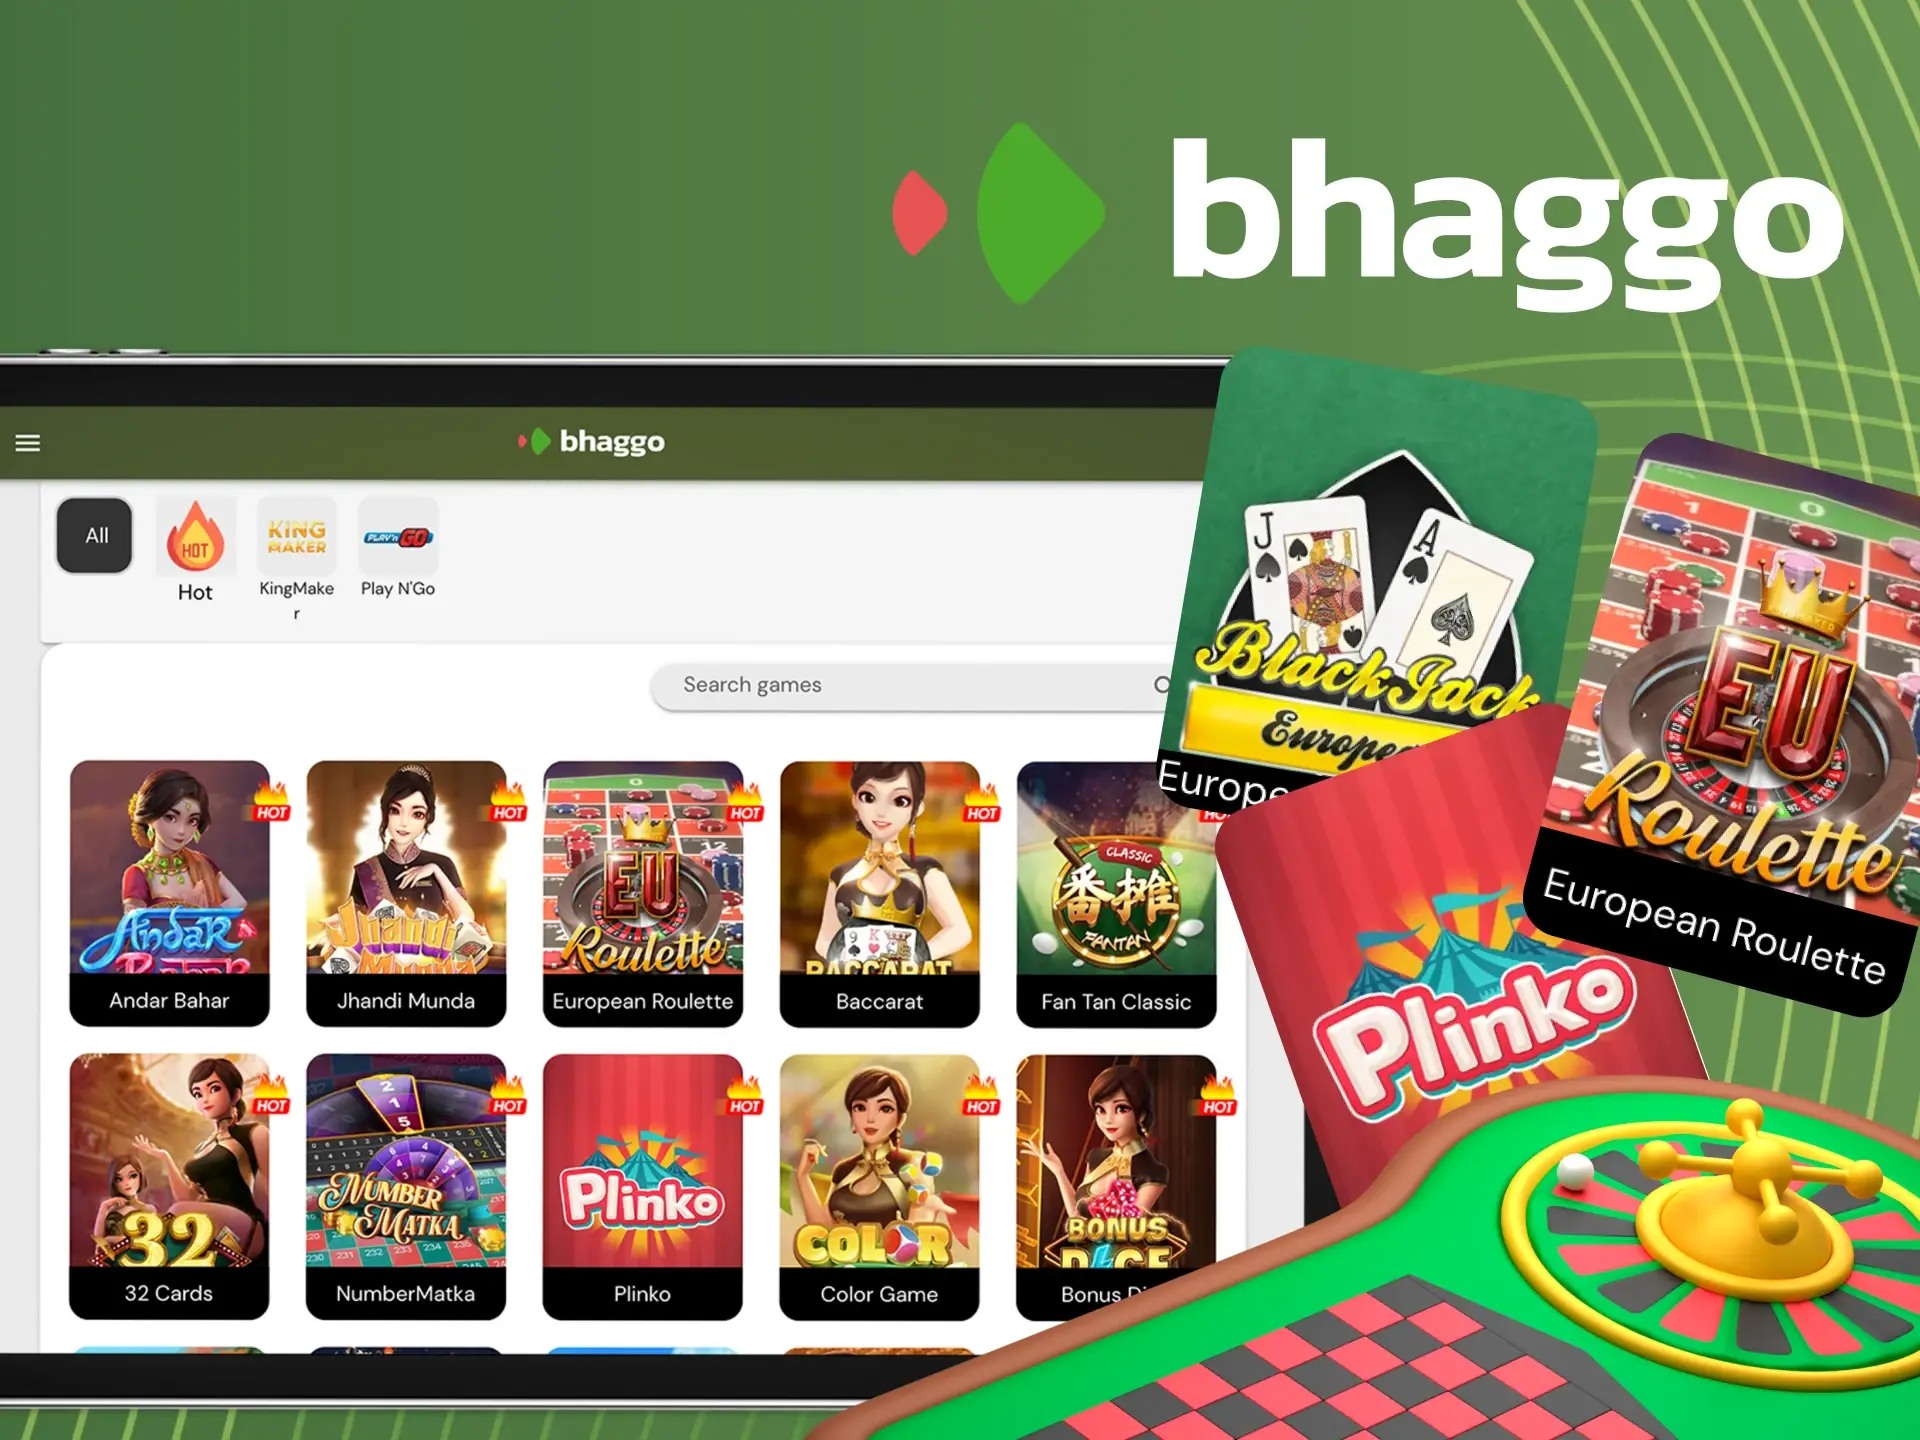 The most popular table games at Bhaggo.